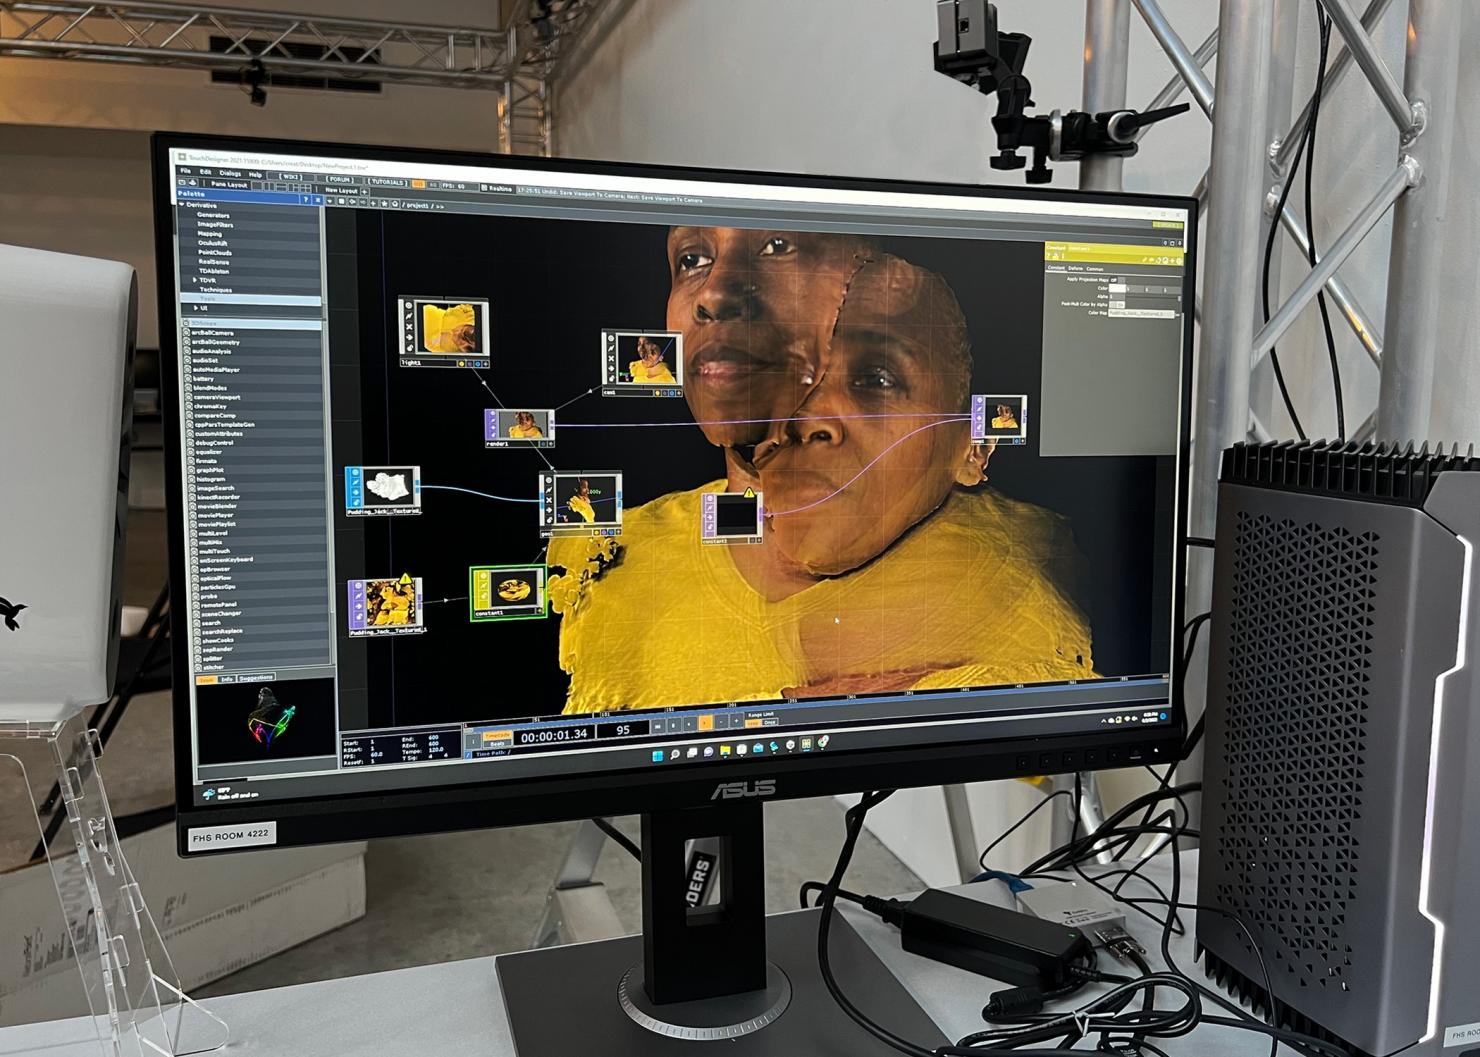 A computer screen displays a photo of a black woman wearing a yellow shirt